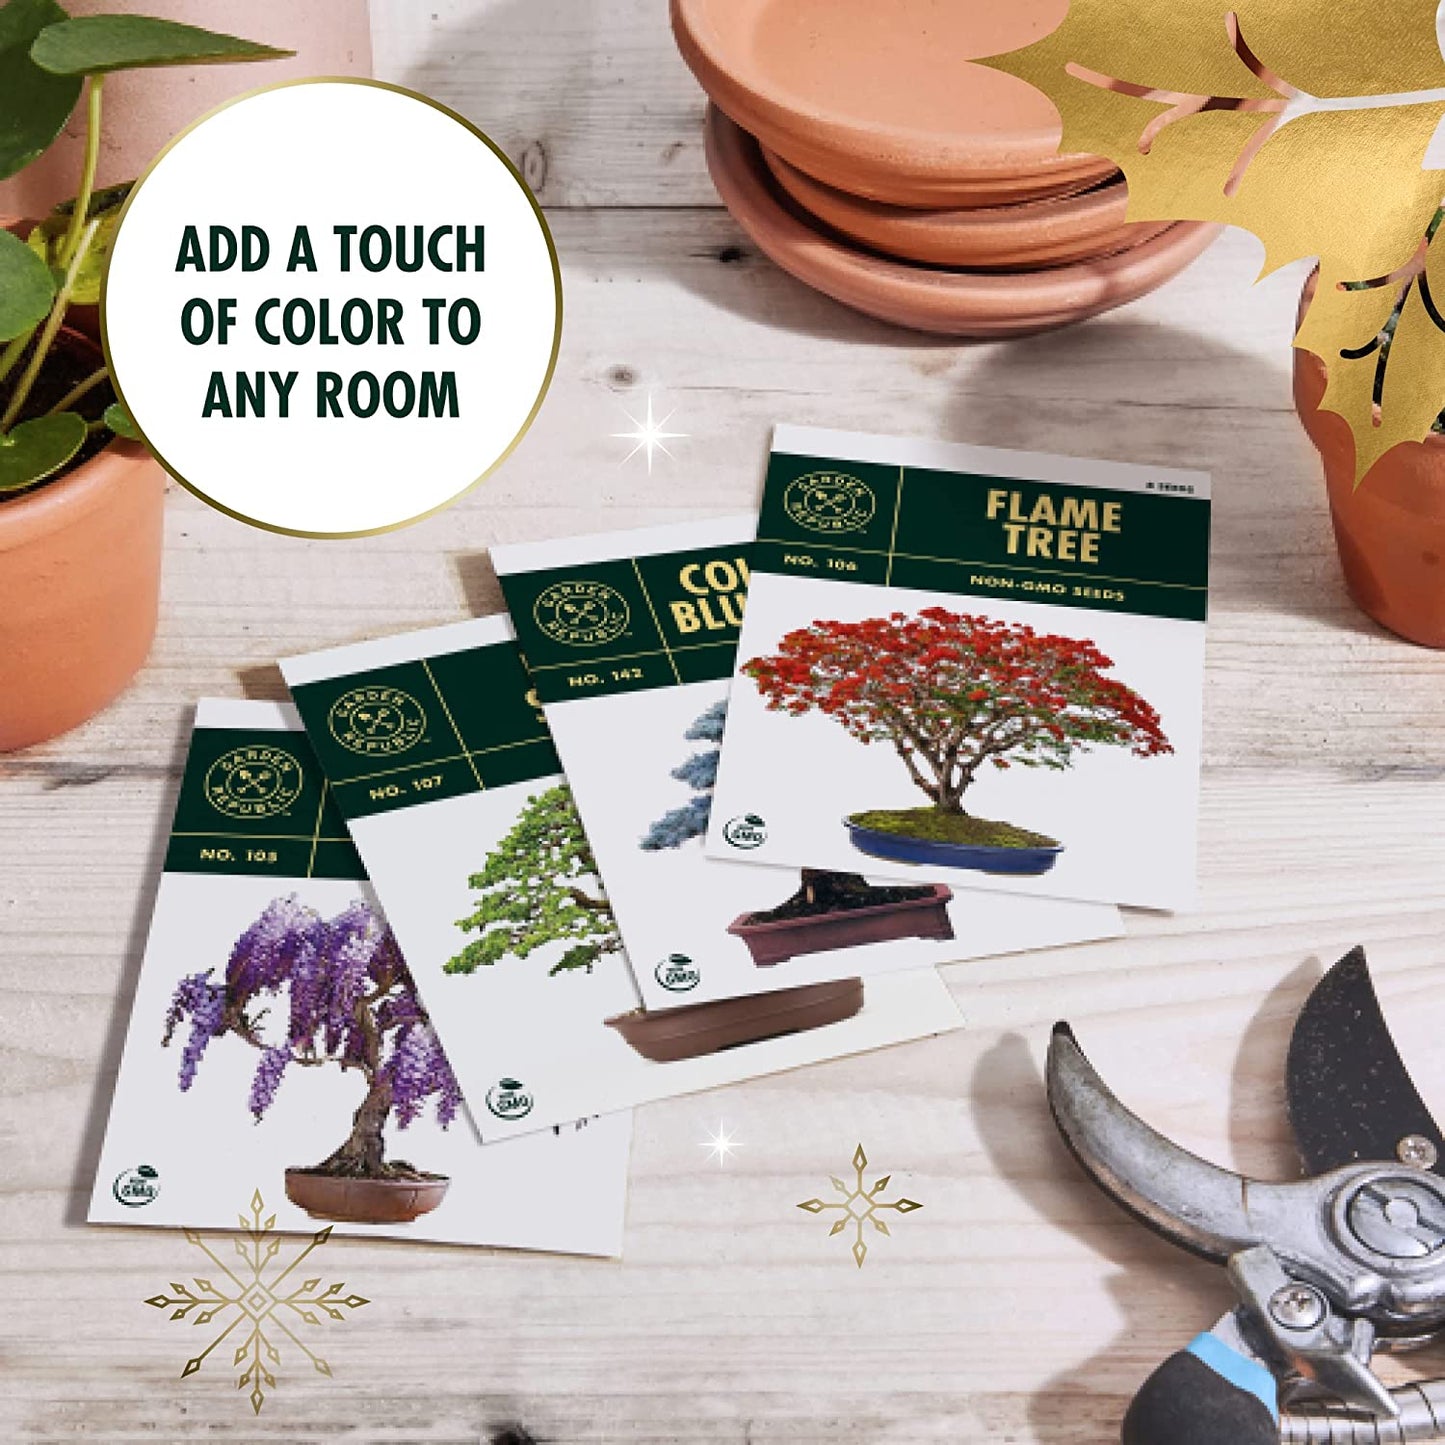 Four pamphlets are laying on a table related to the bonsai starter kit. There is text which reads, 'Add a touch of color to any room.'